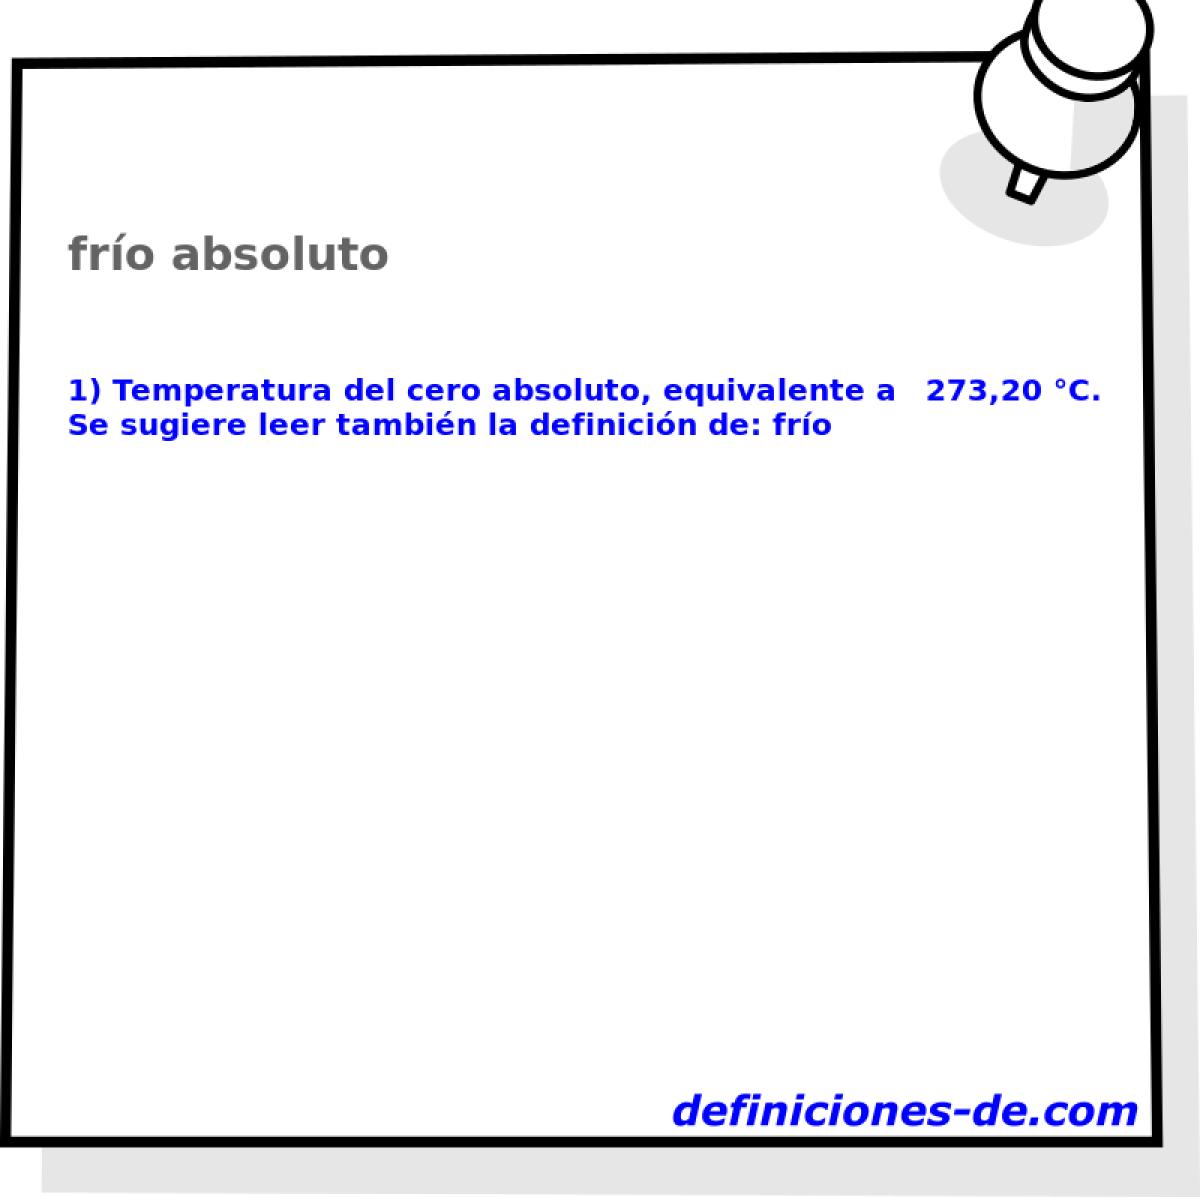 fro absoluto 